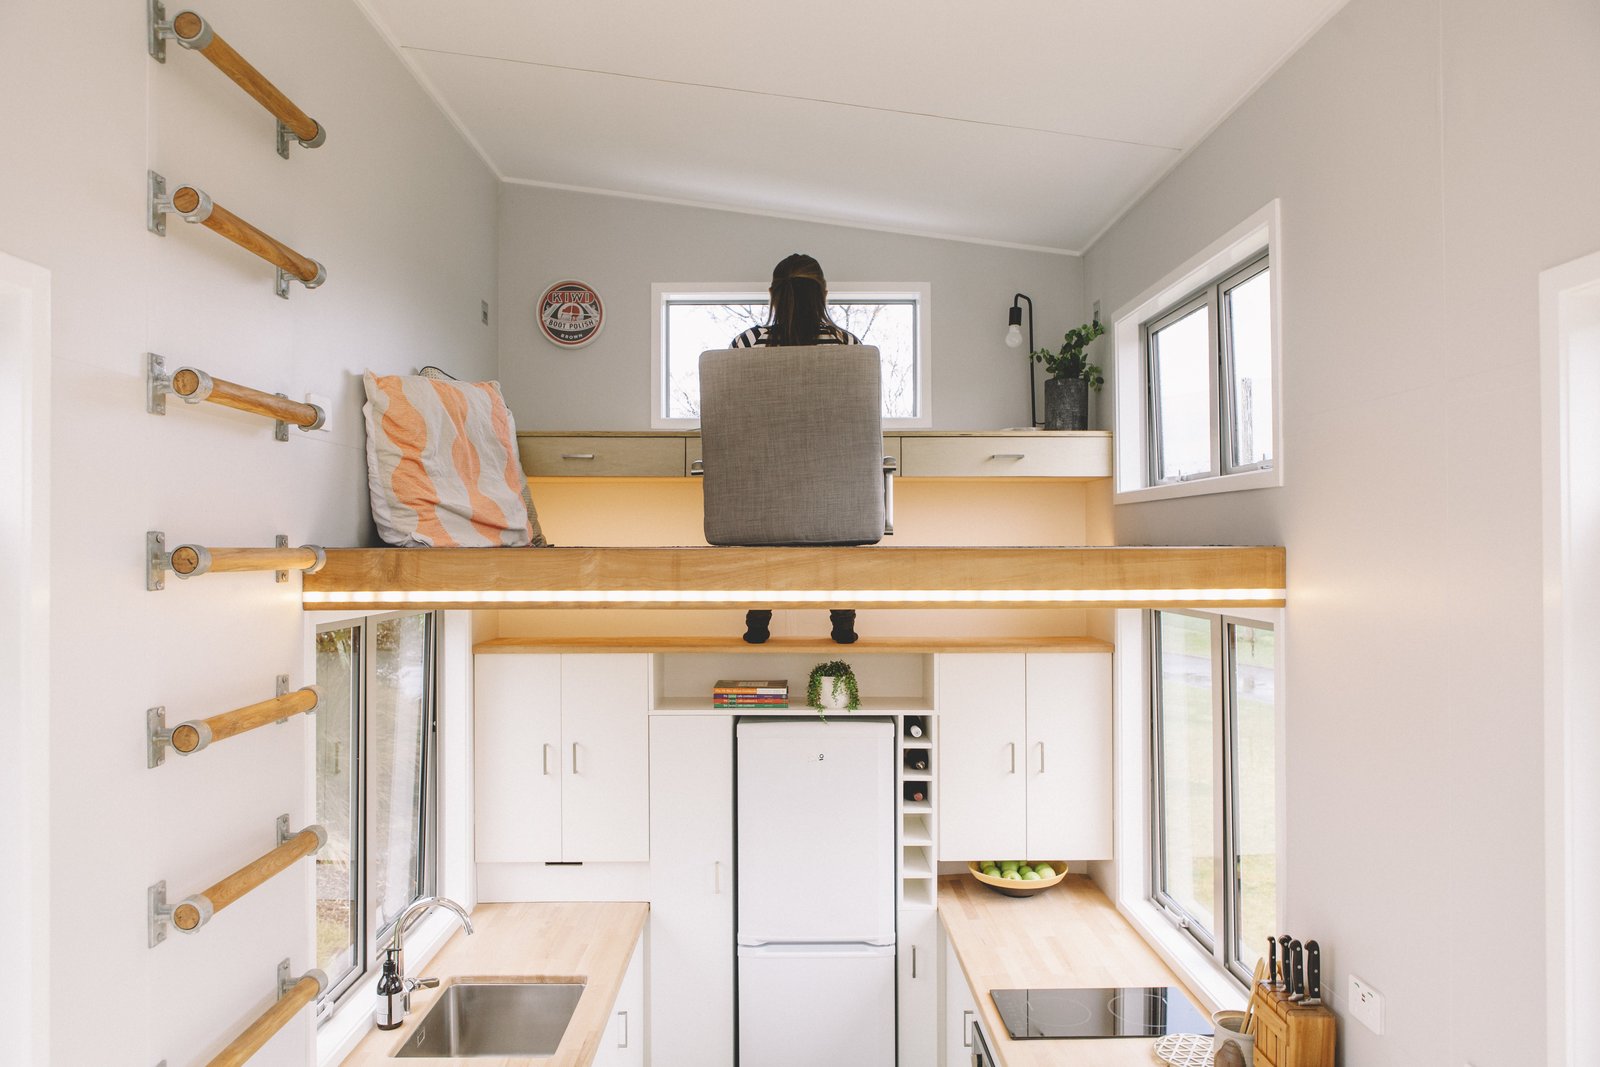 https://www.arch2o.com/wp-content/uploads/2023/04/Arch2O-25-creative-tiny-house-storage-ideas-for-your-little-retreat-1.jpg